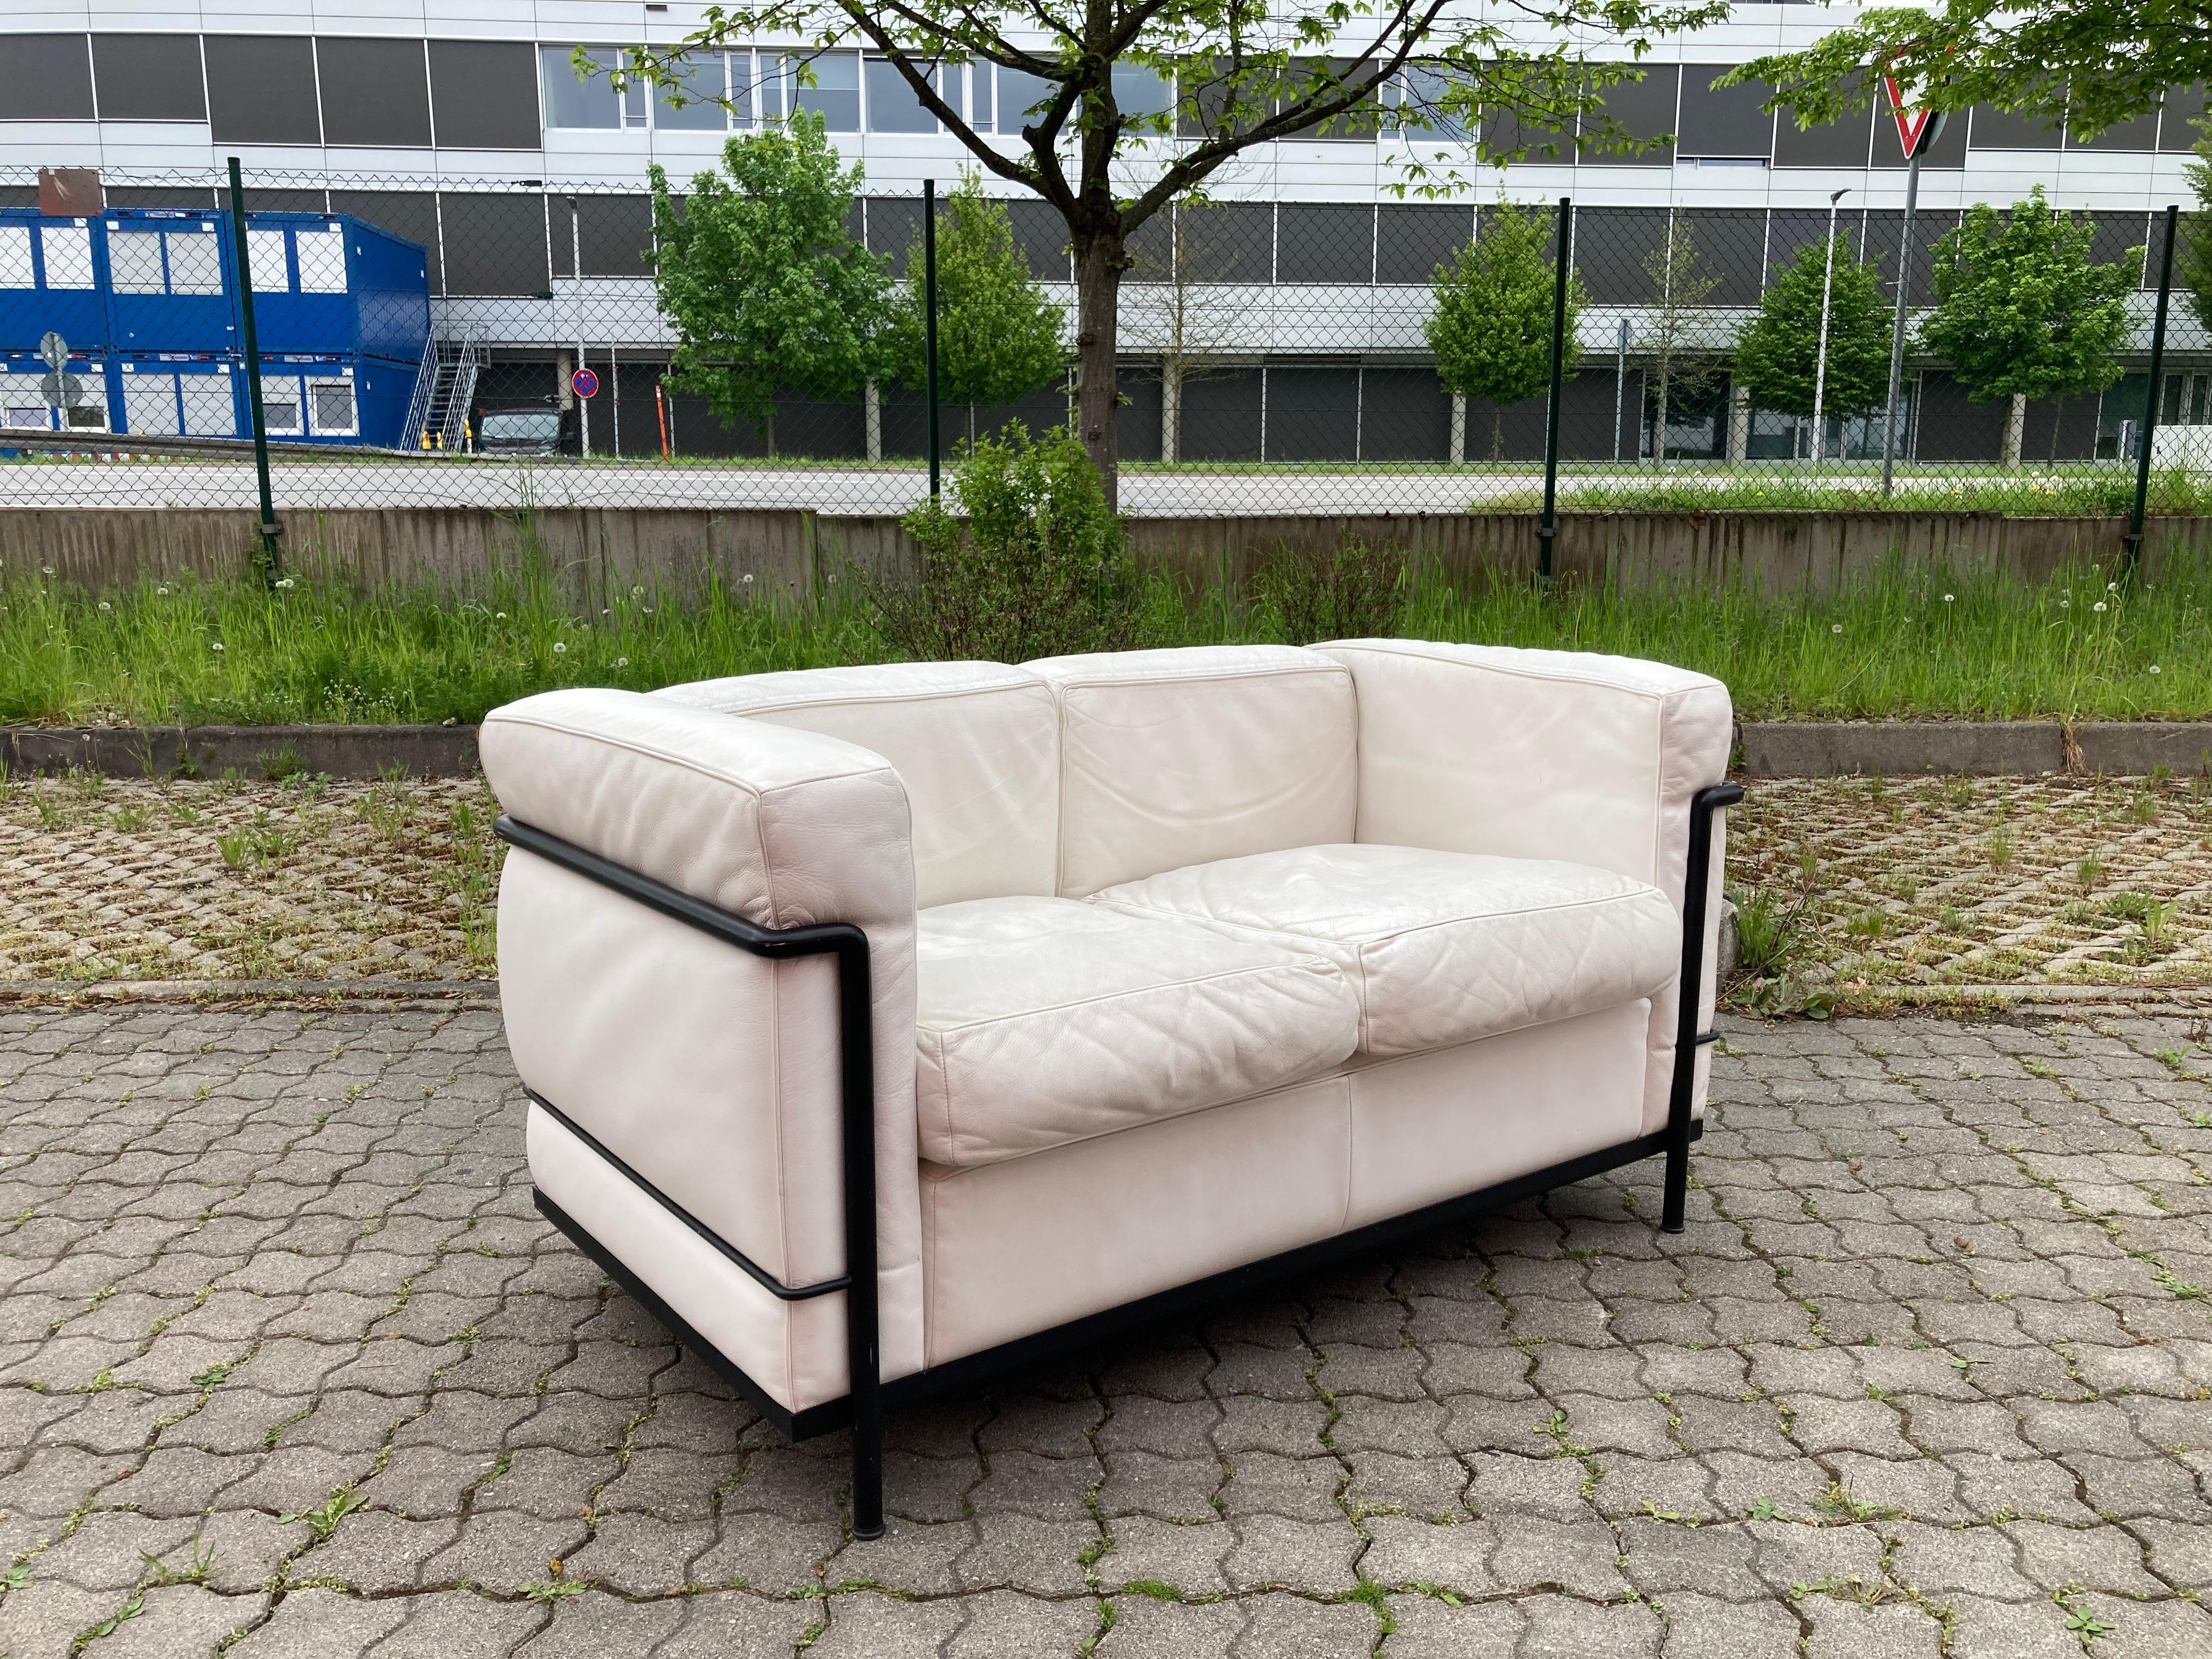 This LC2 two seater sofa in white leather was designed by Le Corbusier and produced by Cassina.
It features a black colored tubular steel frame. 
The leather has some patina.
Some marks on the tubular frame.
A Classic Iconic Sofa in a beautiful